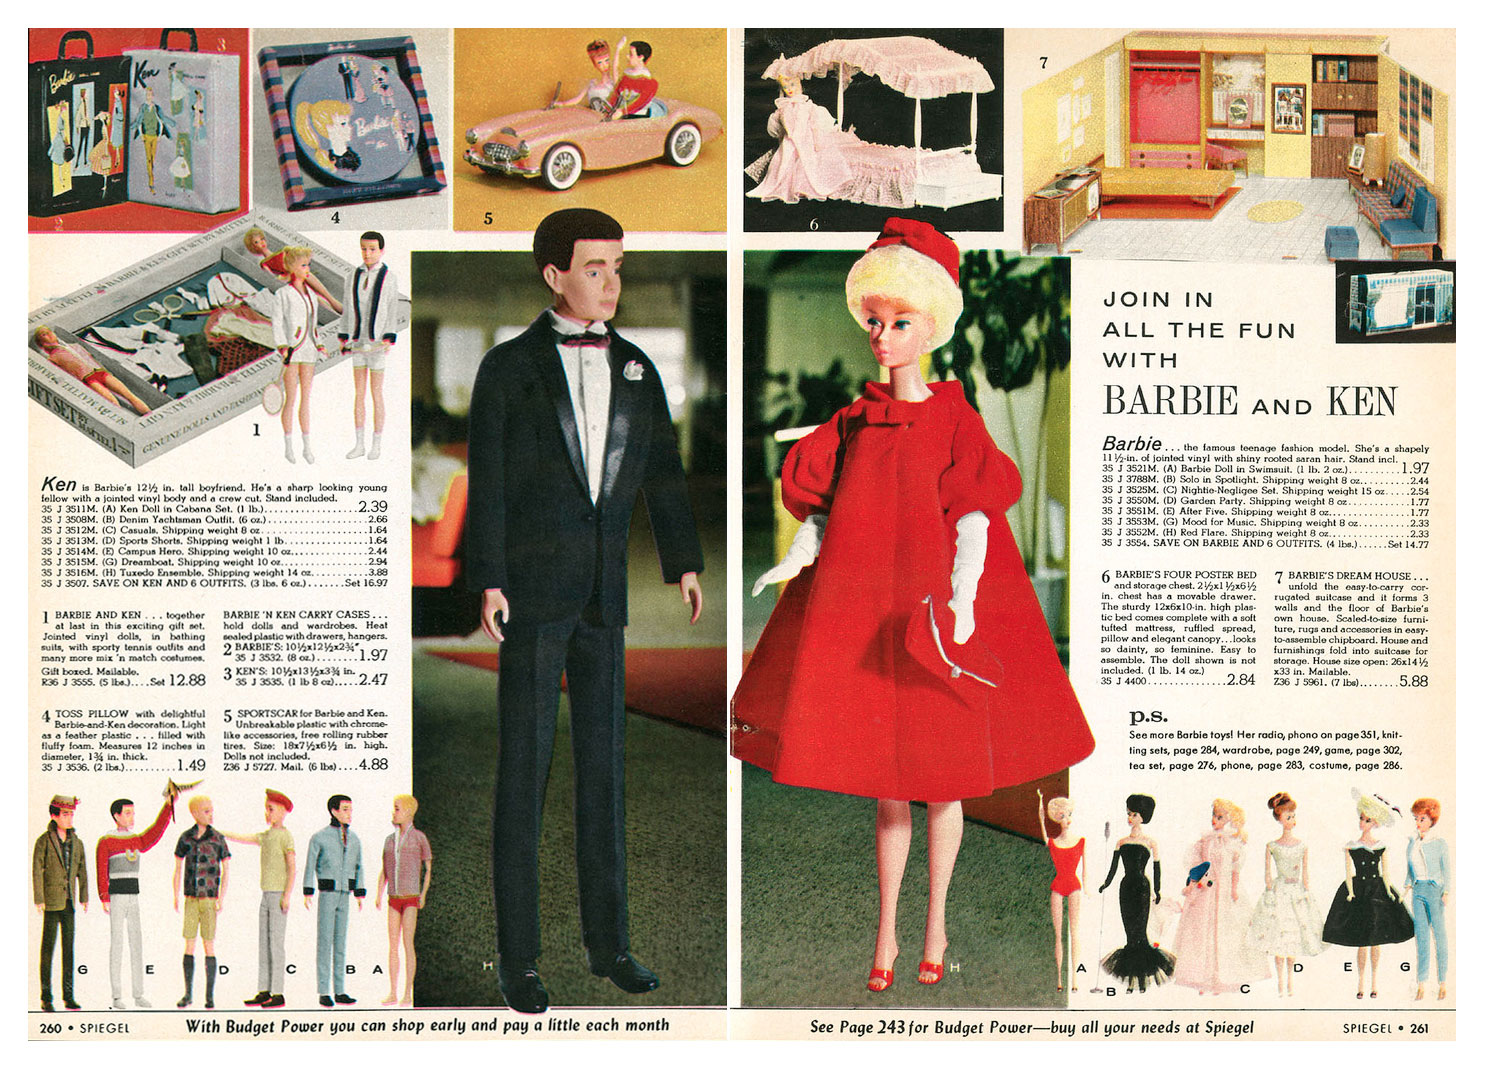 From 1962 Spiegel Christmas catalogue